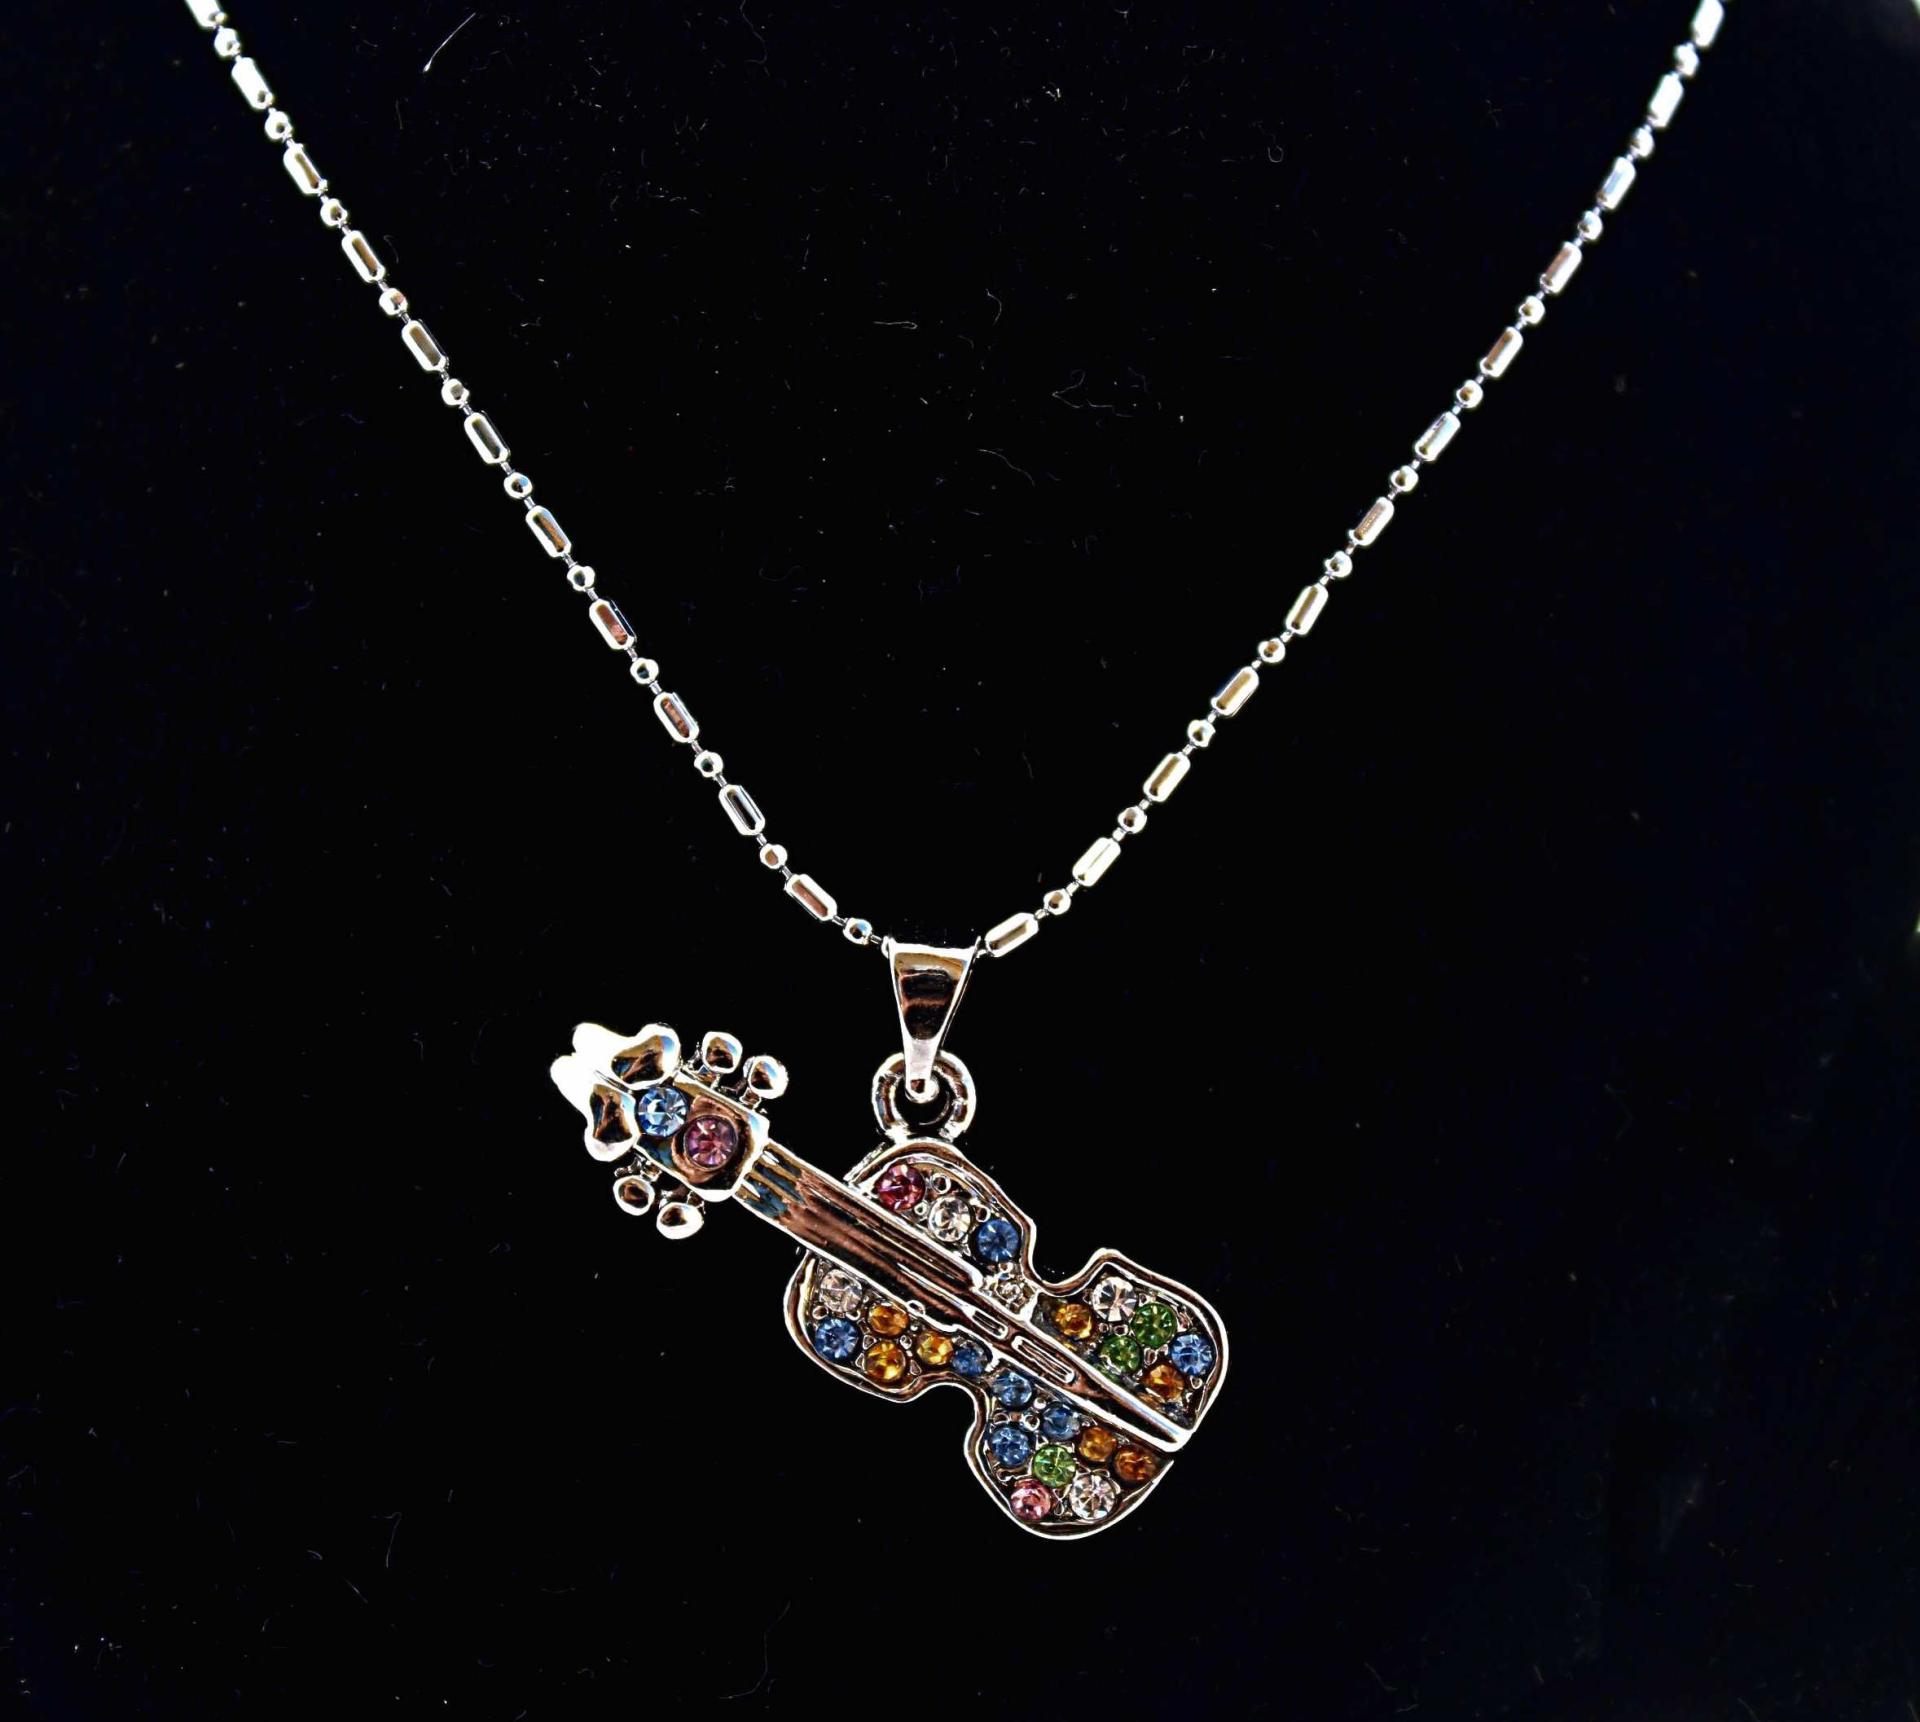 Acoustic Crystal  Guitar Music Necklace